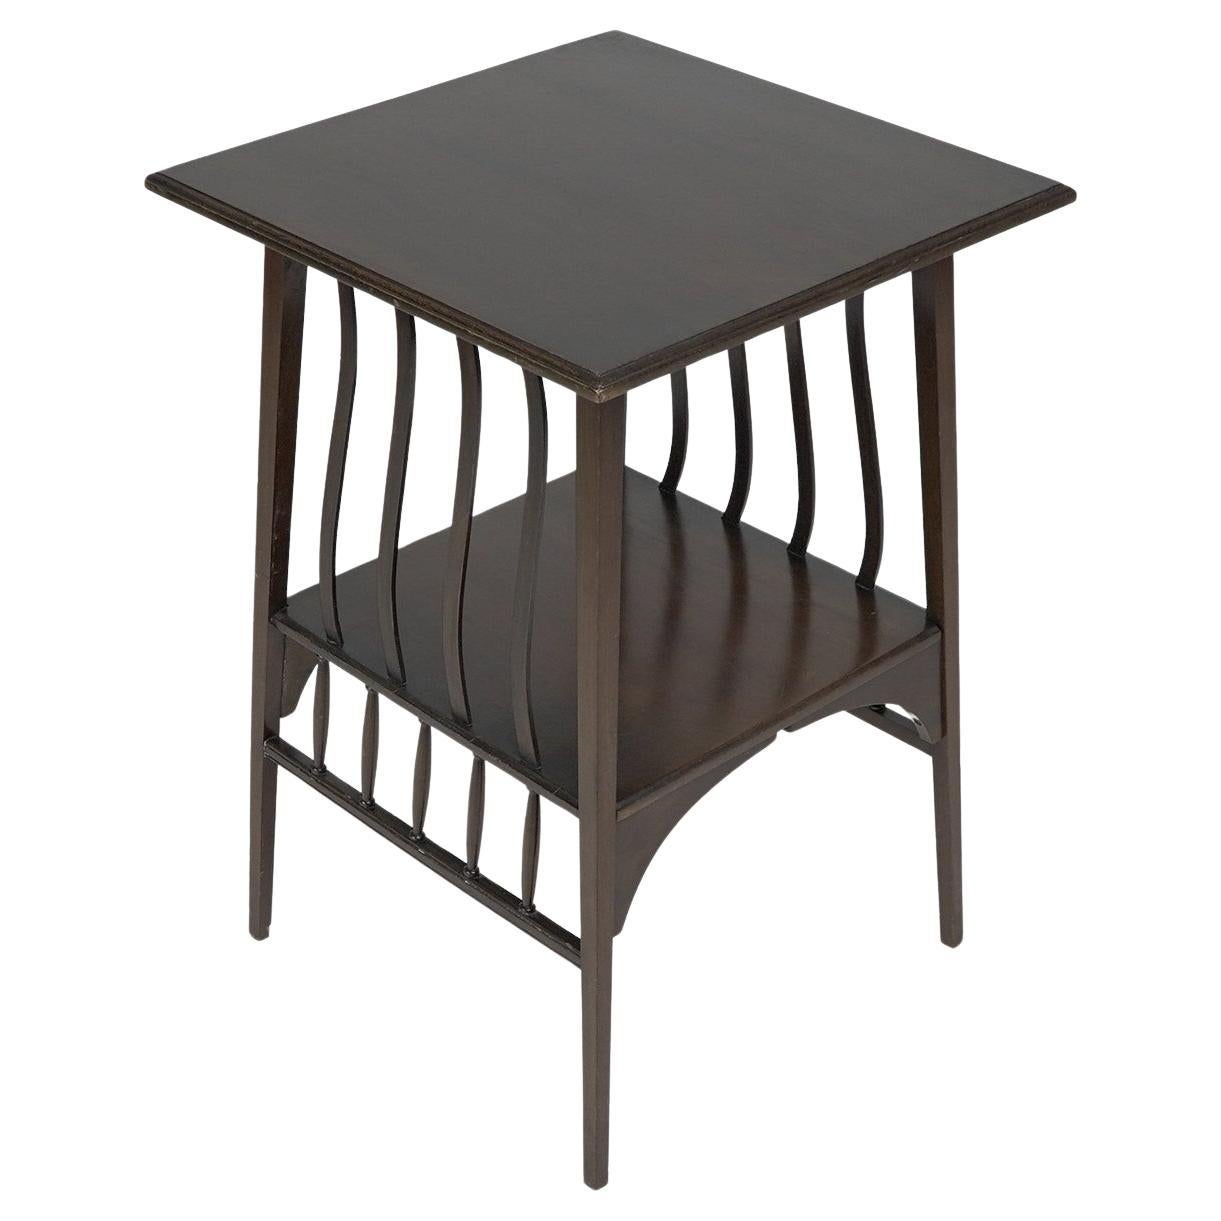 Liberty & Co An Aesthetic Movement Walnut side table with a touch of Art Nouveau